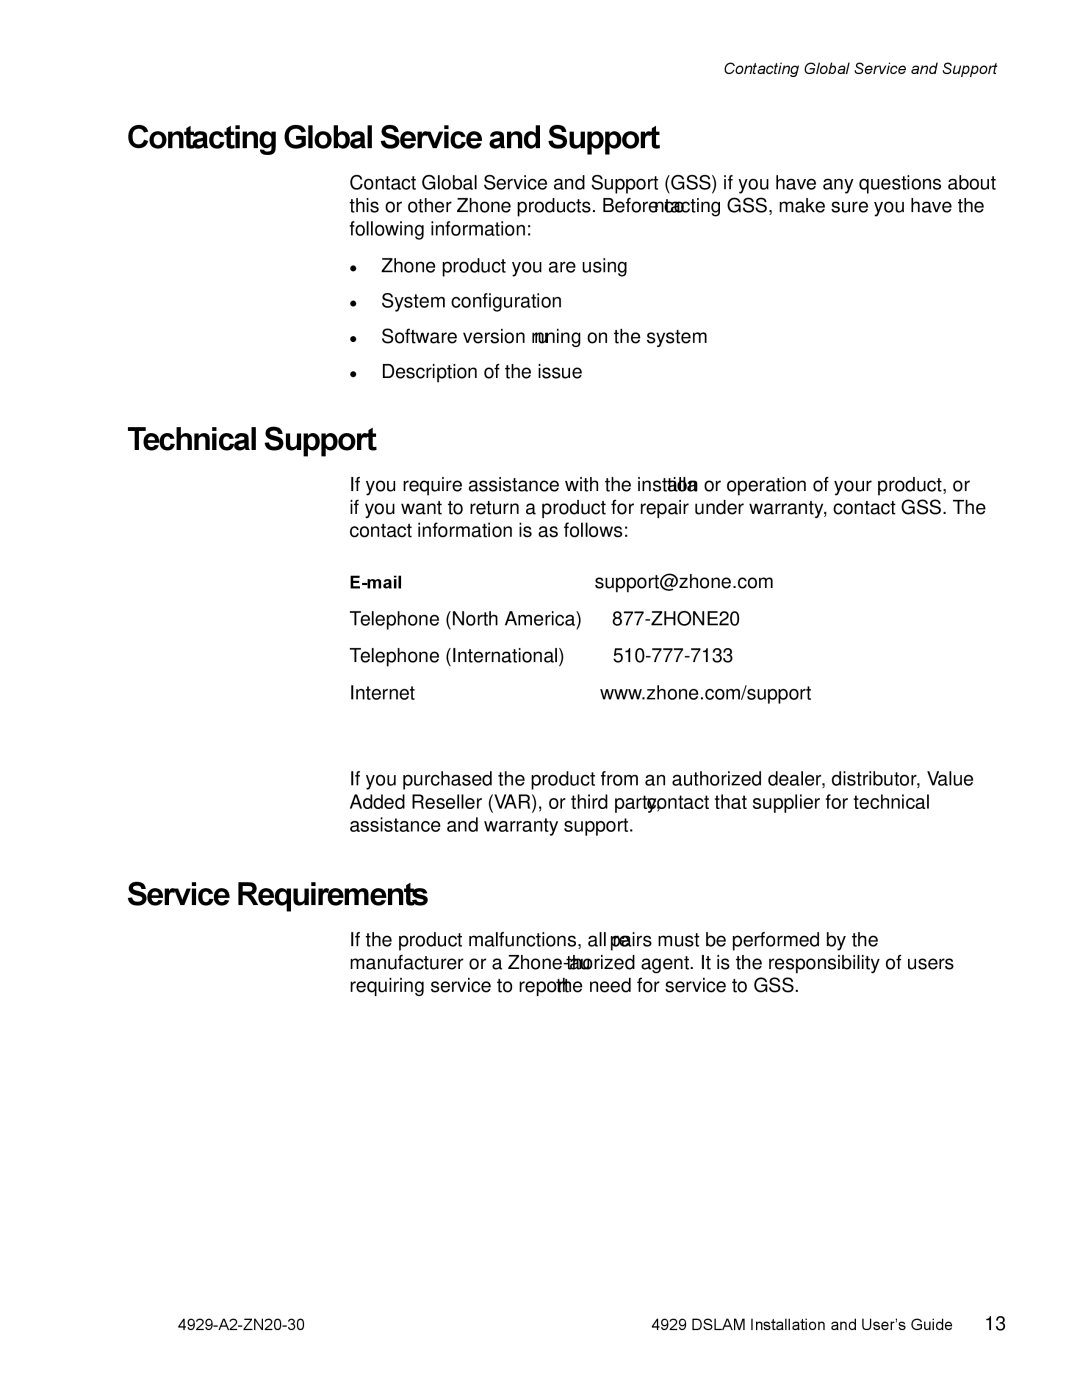 Zhone Technologies 4929 DSLAM manual Contacting Global Service and Support, Technical Support, Service Requirements 